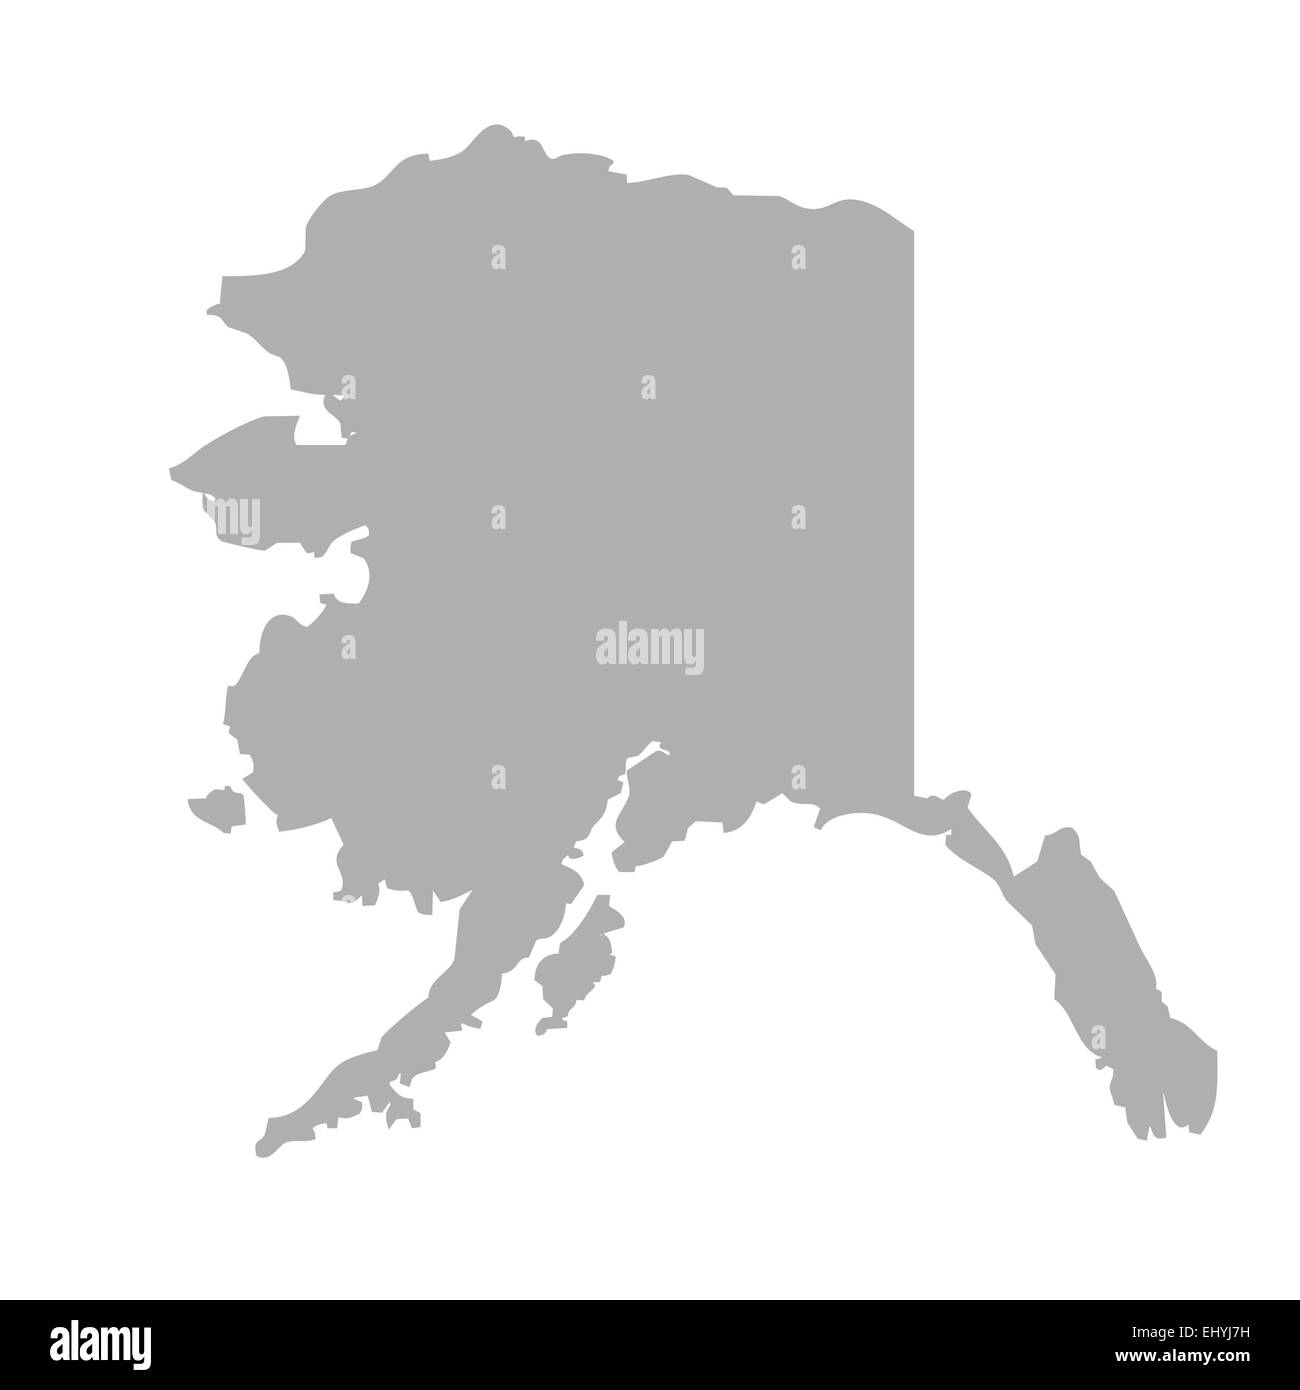 Alaska map isolated on a white background, U.S.A. Stock Photo